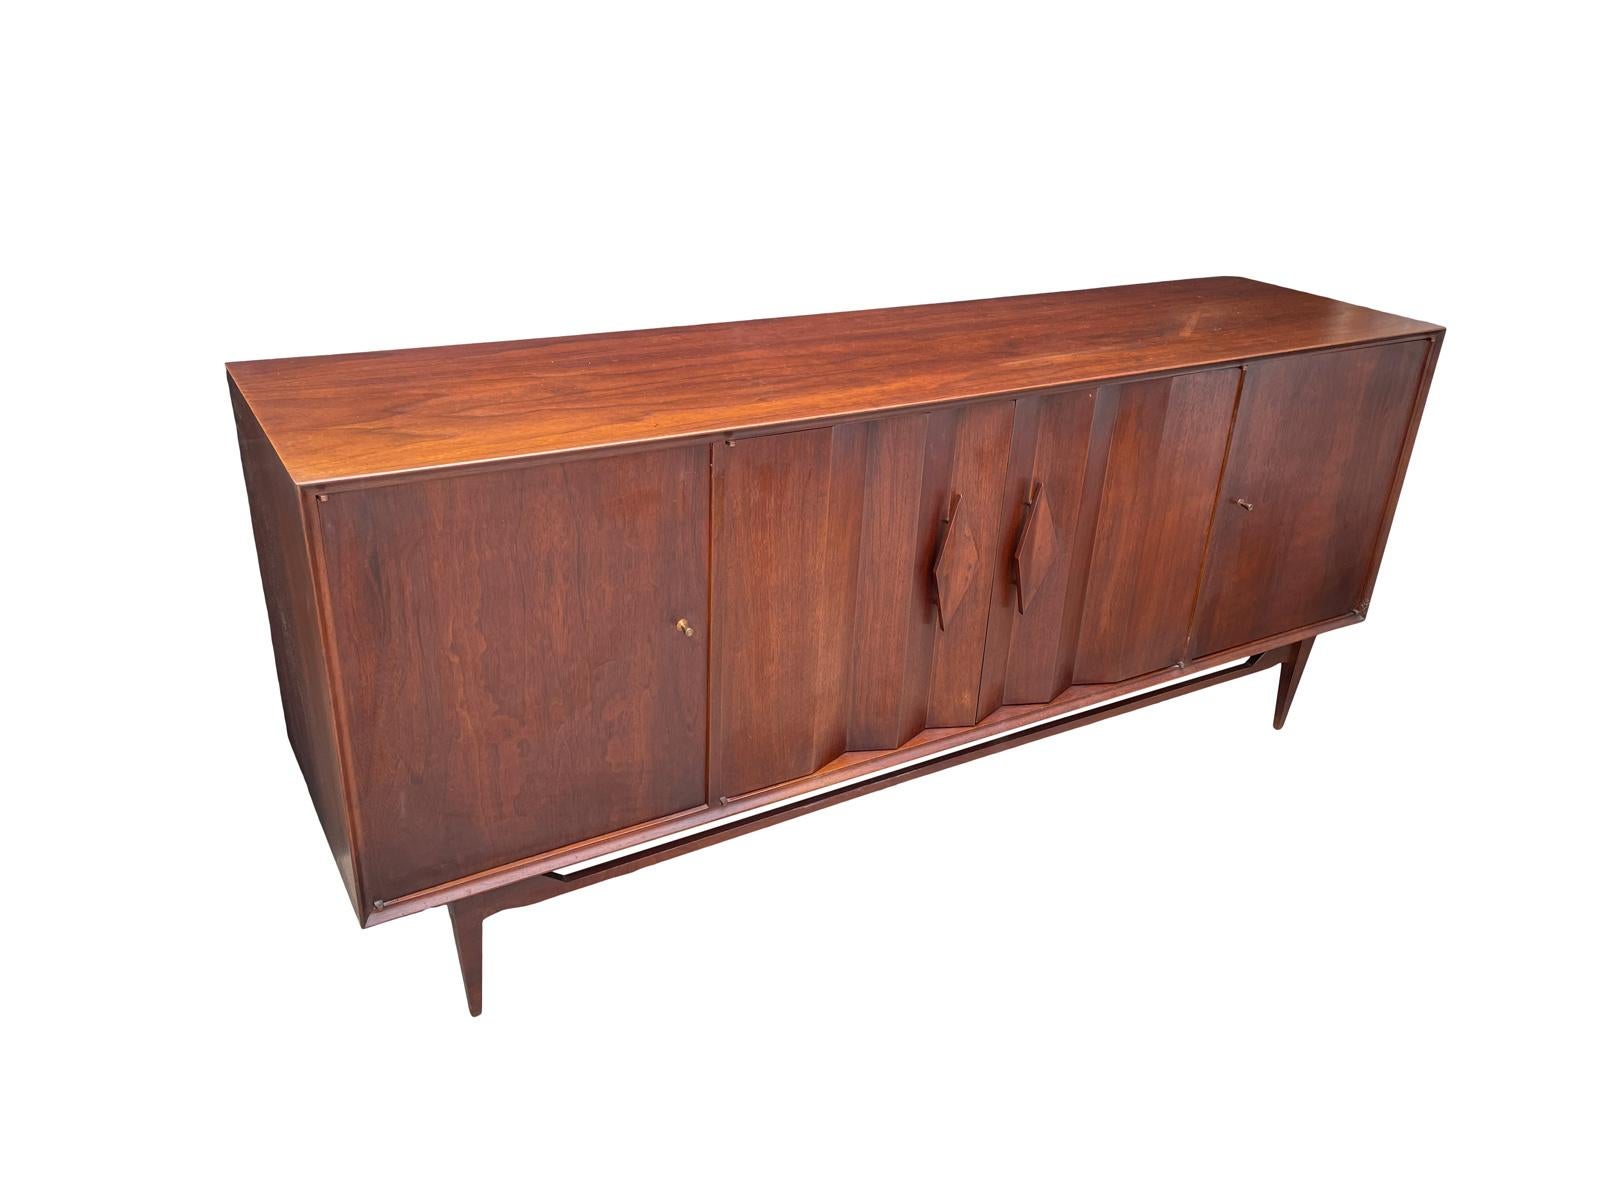 Handsome walnut credenza by specialty woodcraft circa 1960s featuring a unique sculpted front and base very rare.Also listed is the matching dining table and chairs if you want the complete set